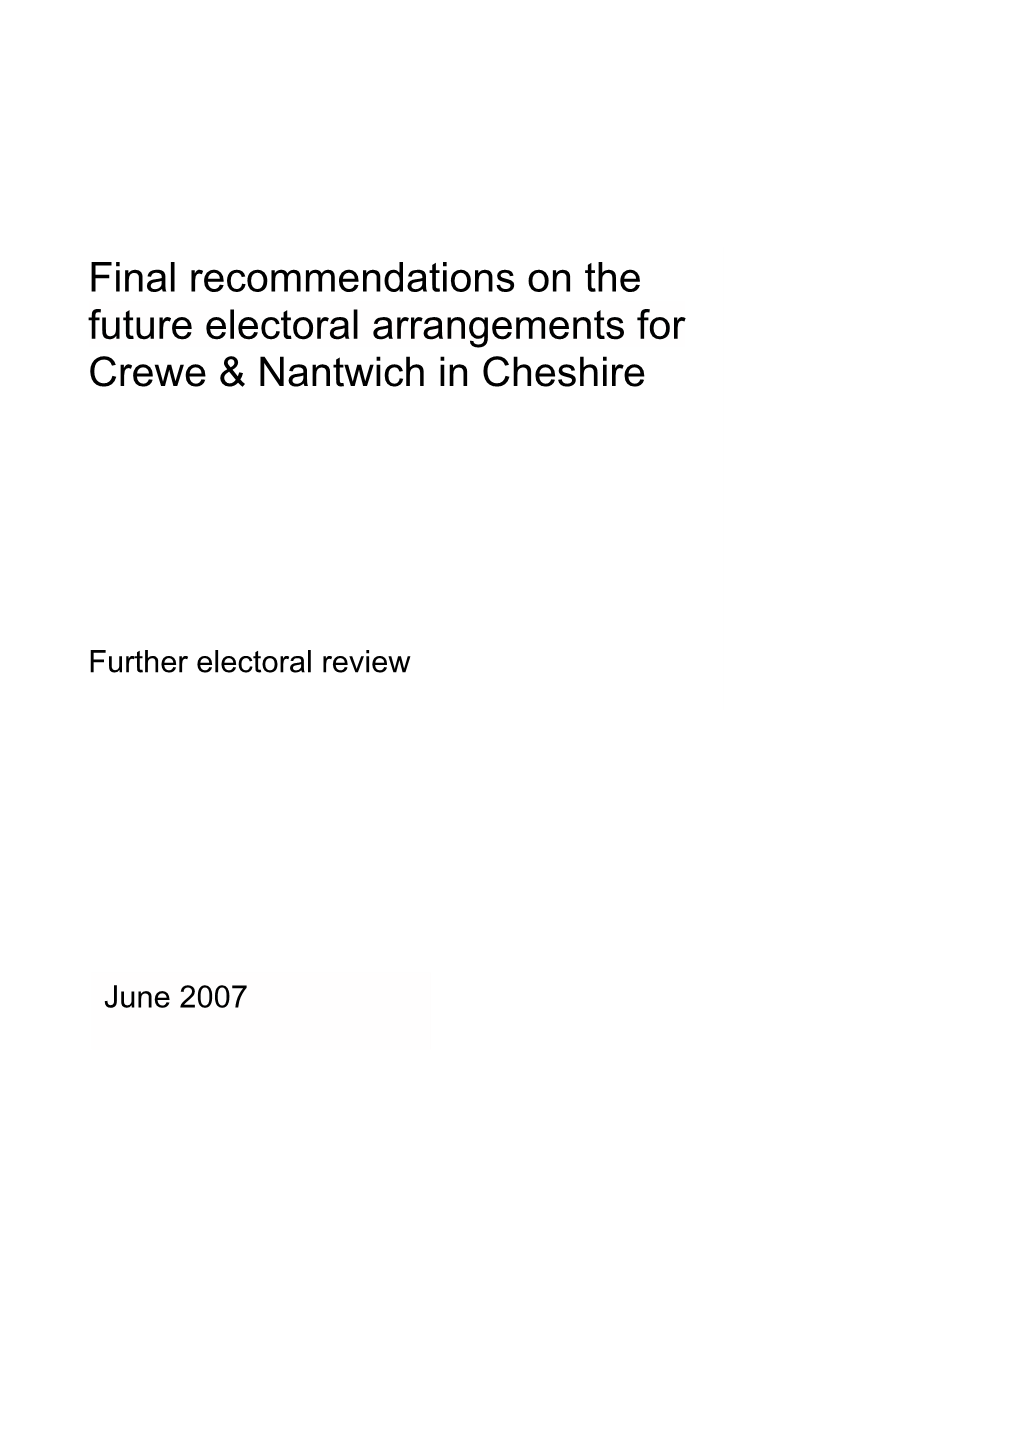 Final Recommendations on the Future Electoral Arrangements for Crewe & Nantwich in Cheshire